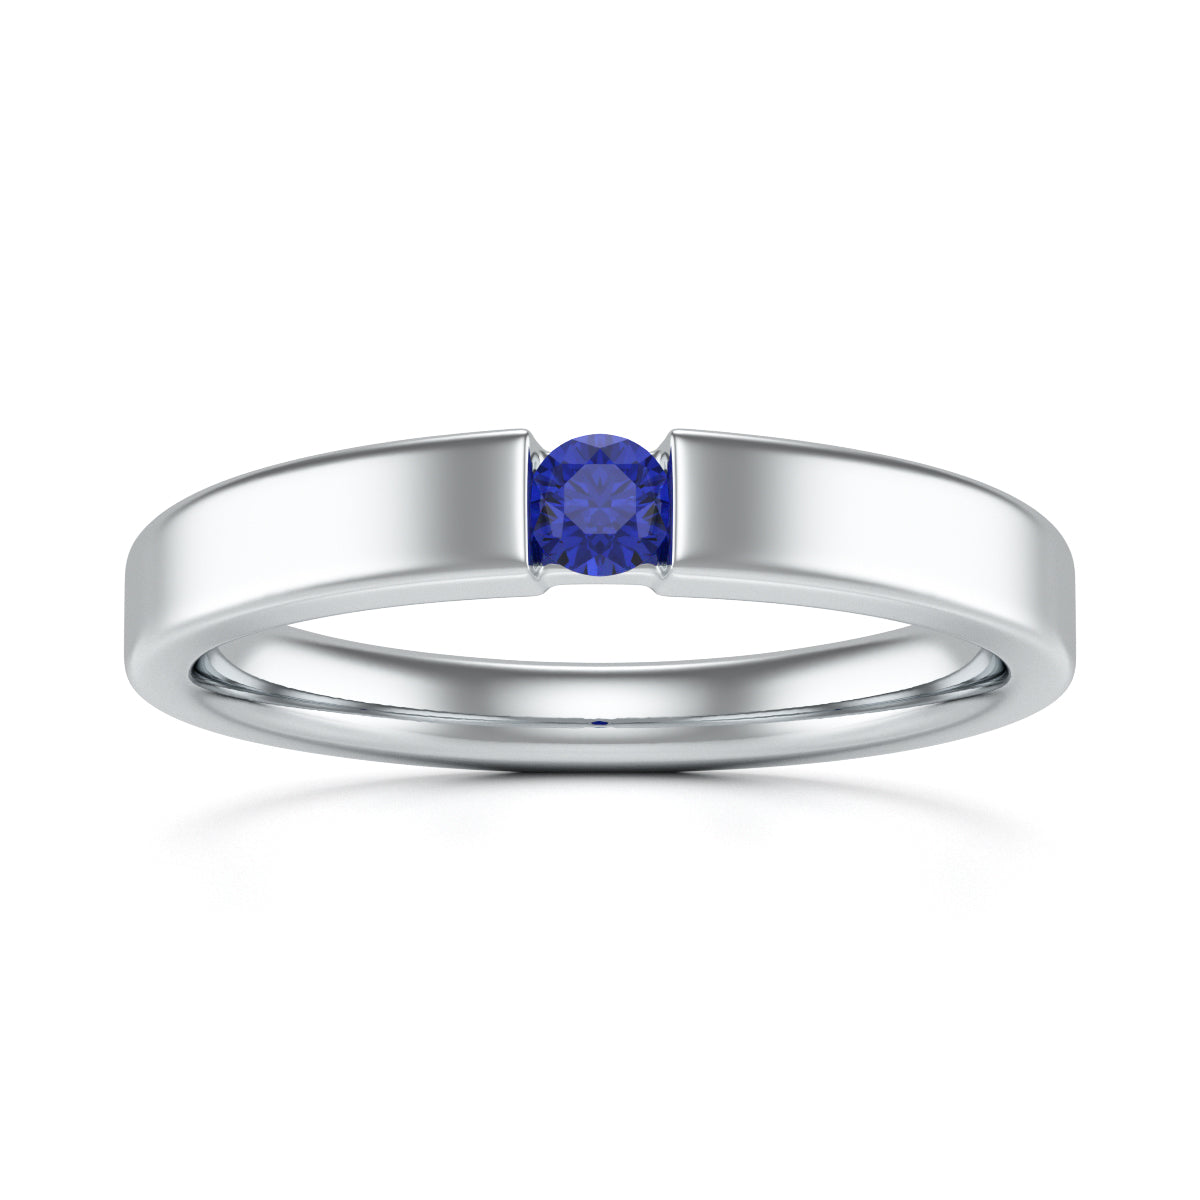 3mm Round Blue Sapphire Tension Set Stacking Ring